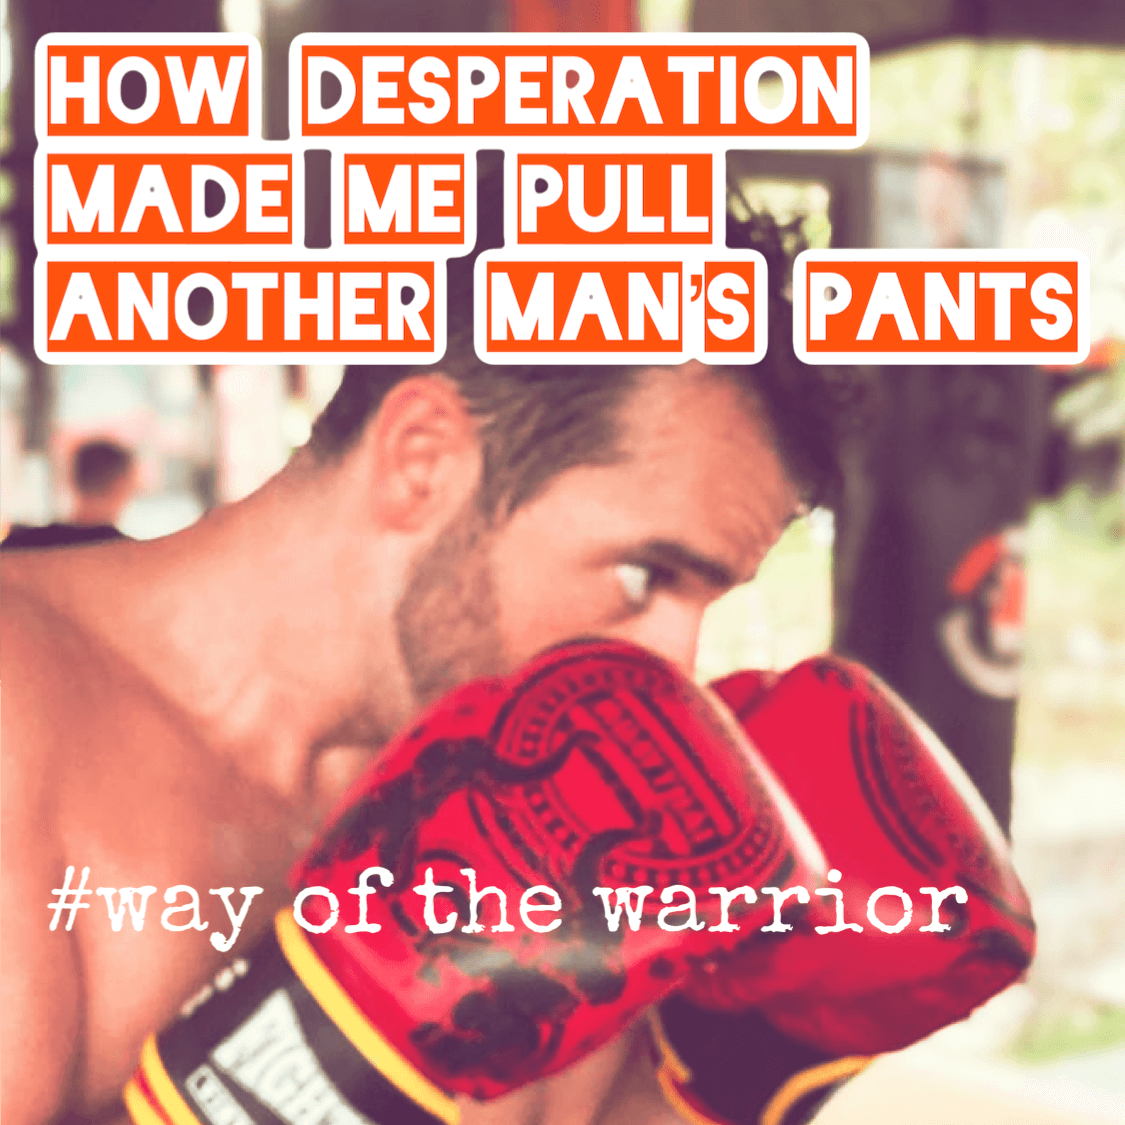 028: Way of the Warrior: Desperation made me pull another man's pants